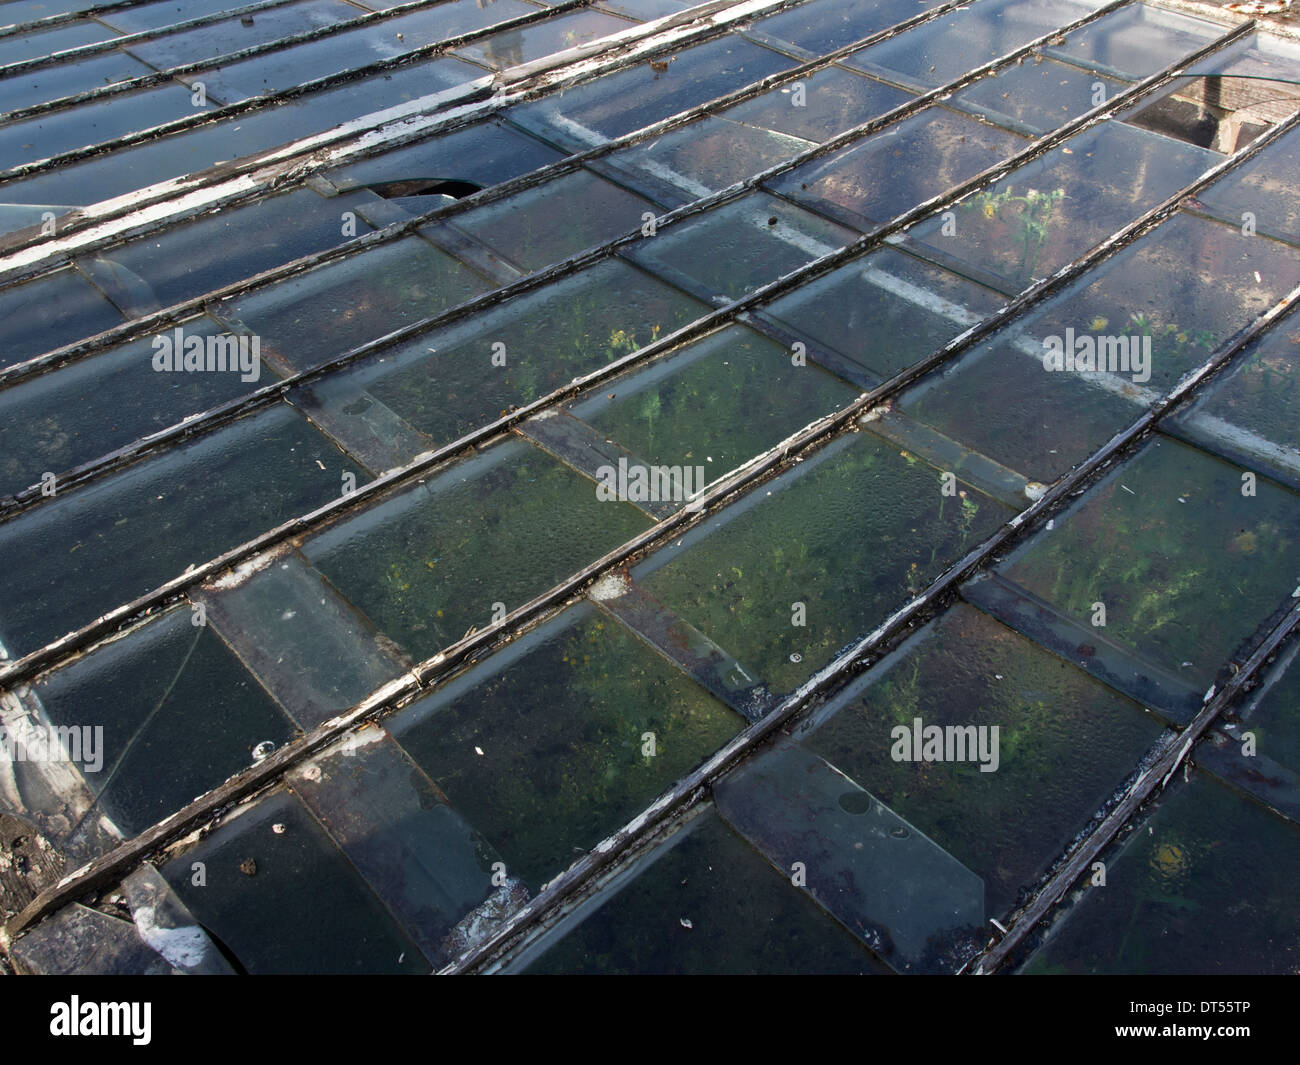 An ancient garden cold-frame with several broken glass panes Stock Photo